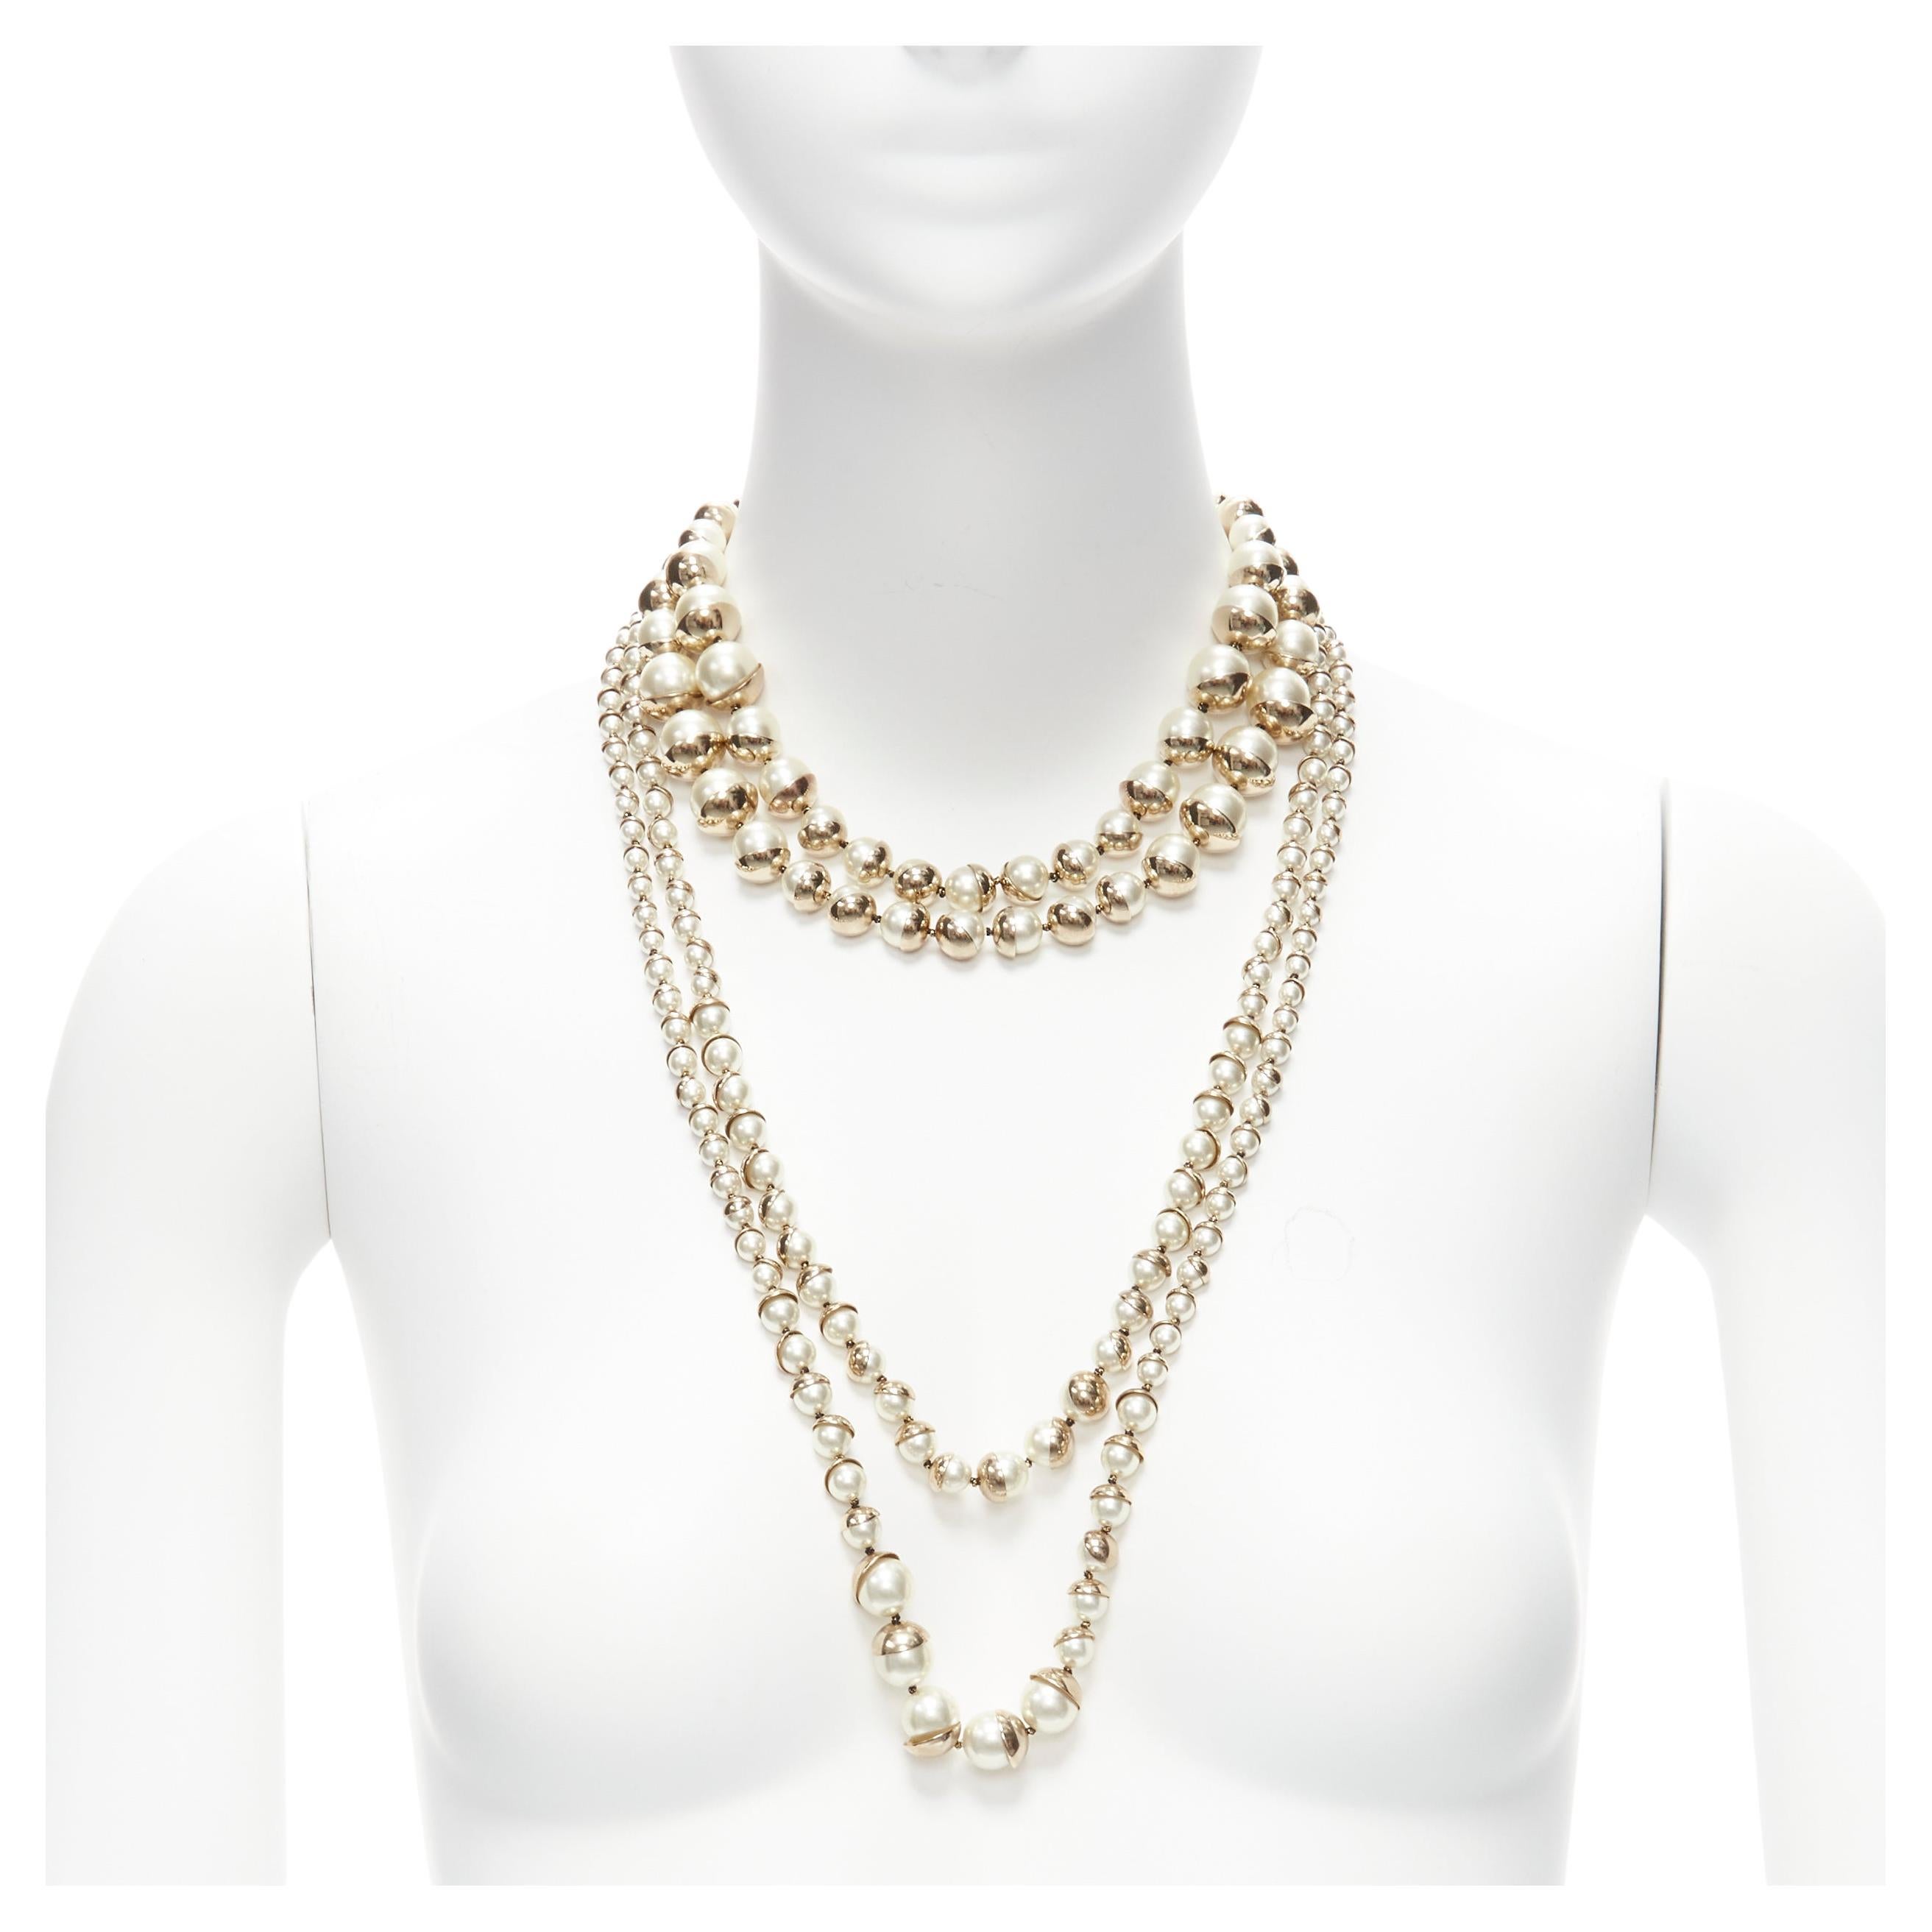 CHRISTIAN DIOR Galliano Vintage faux pearl CD clasp tribal layered necklace